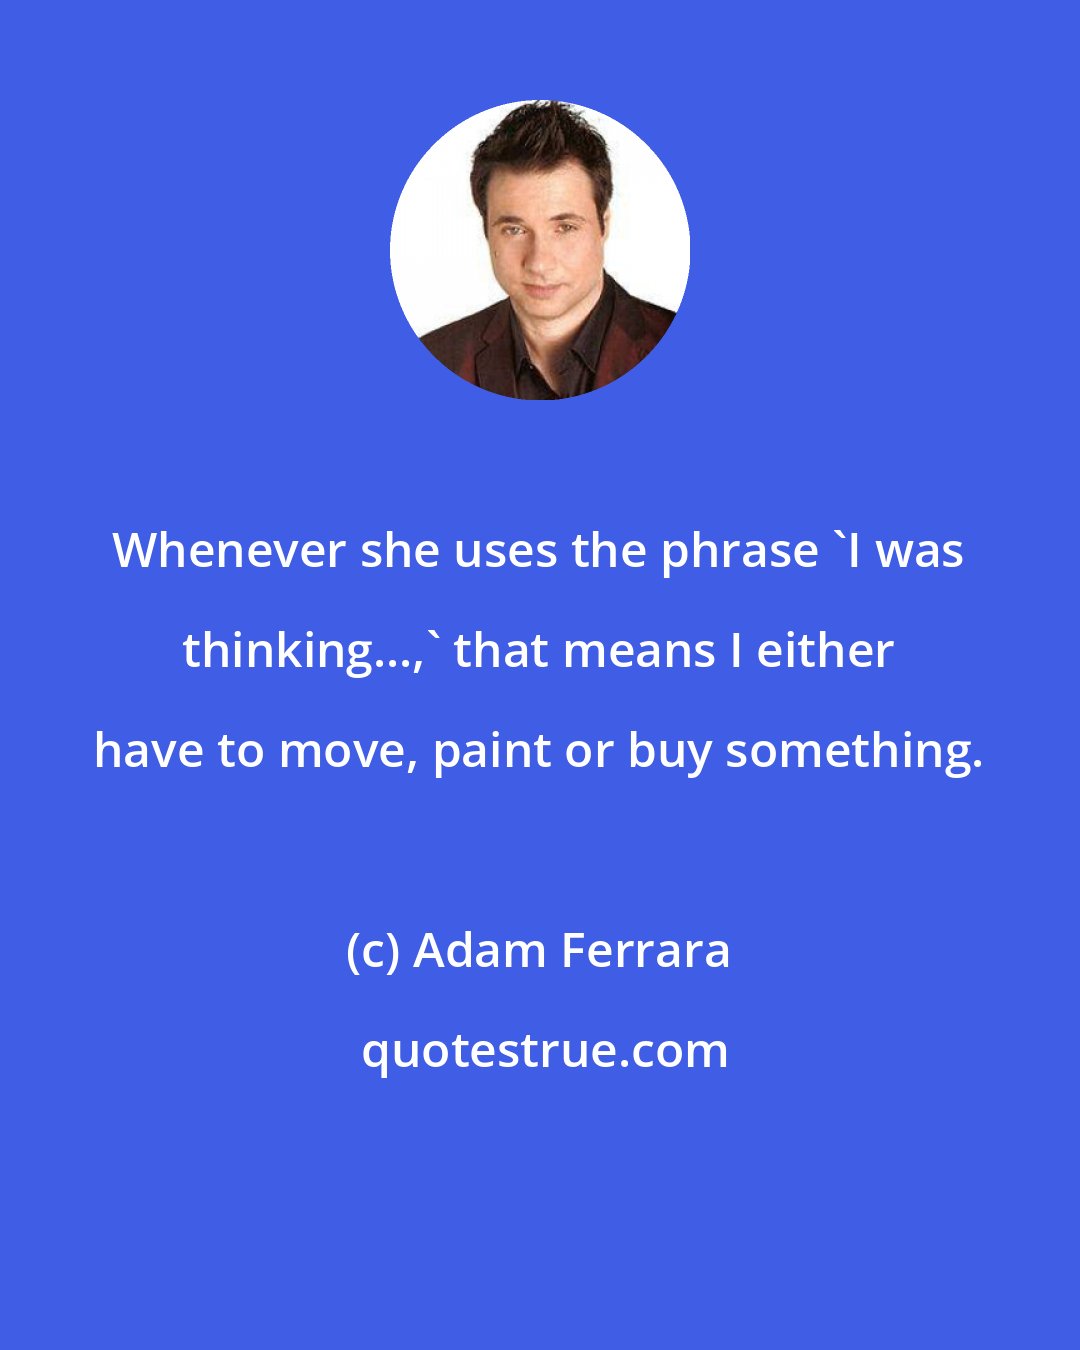 Adam Ferrara: Whenever she uses the phrase 'I was thinking...,' that means I either have to move, paint or buy something.